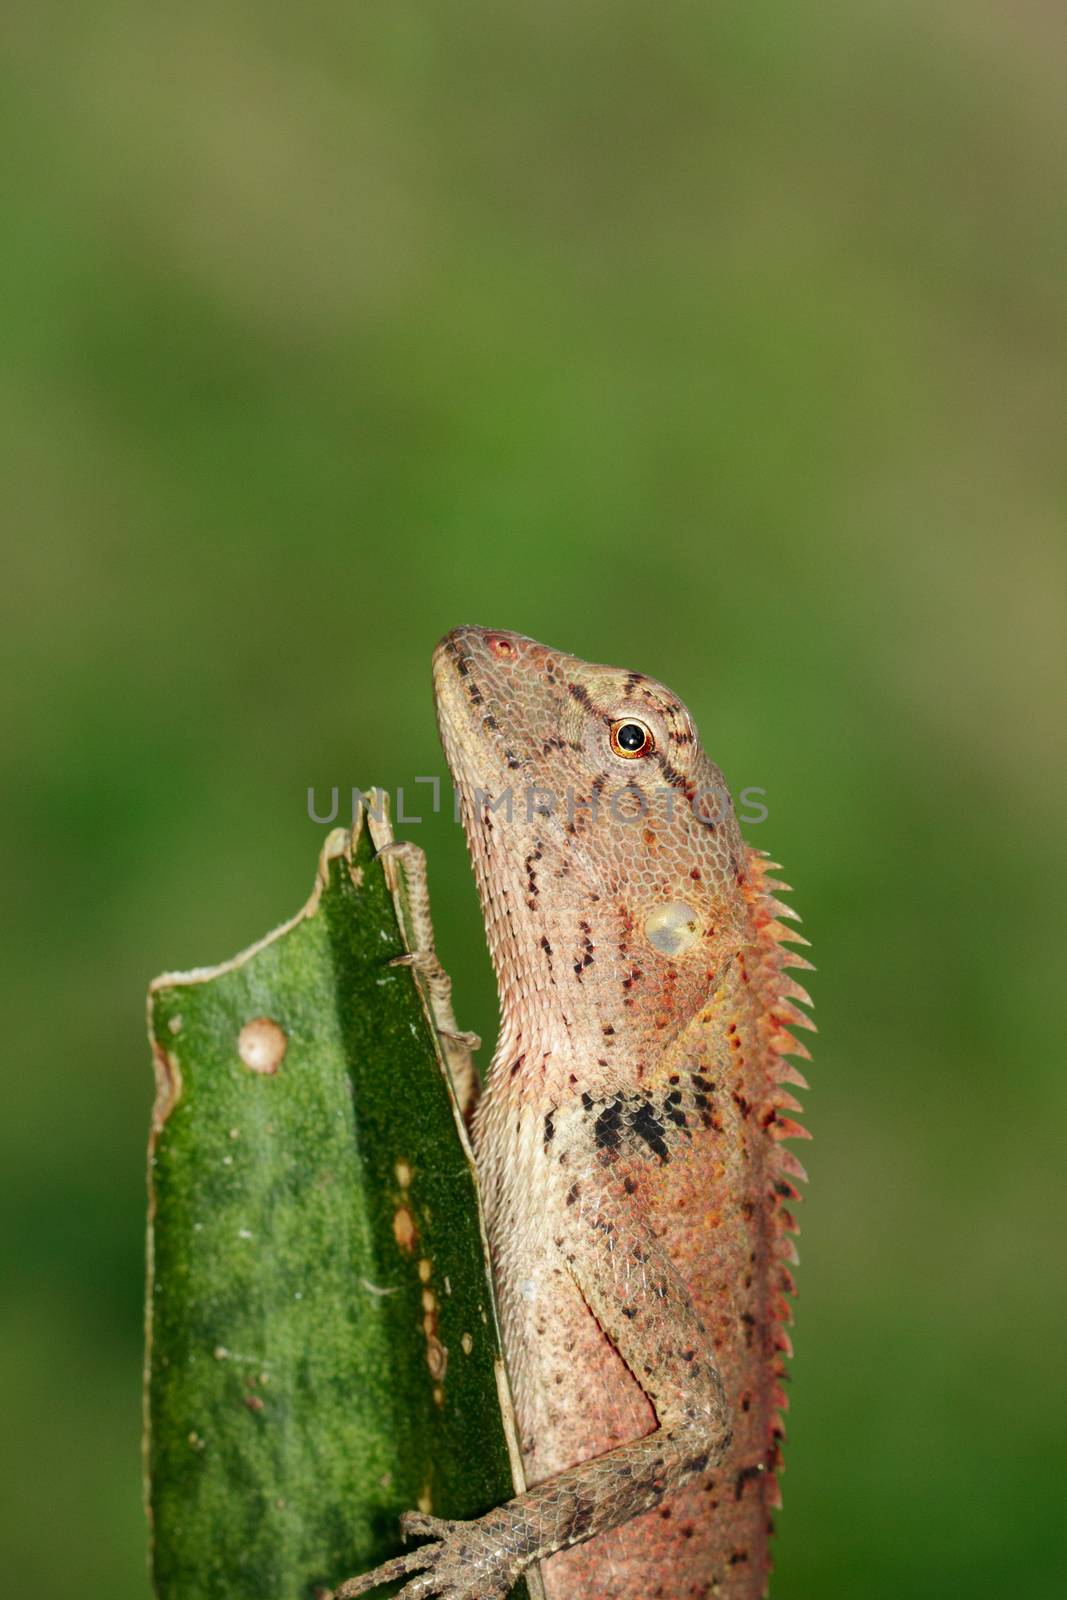 Image of a chameleon on nature background. Reptile. Animal. by yod67